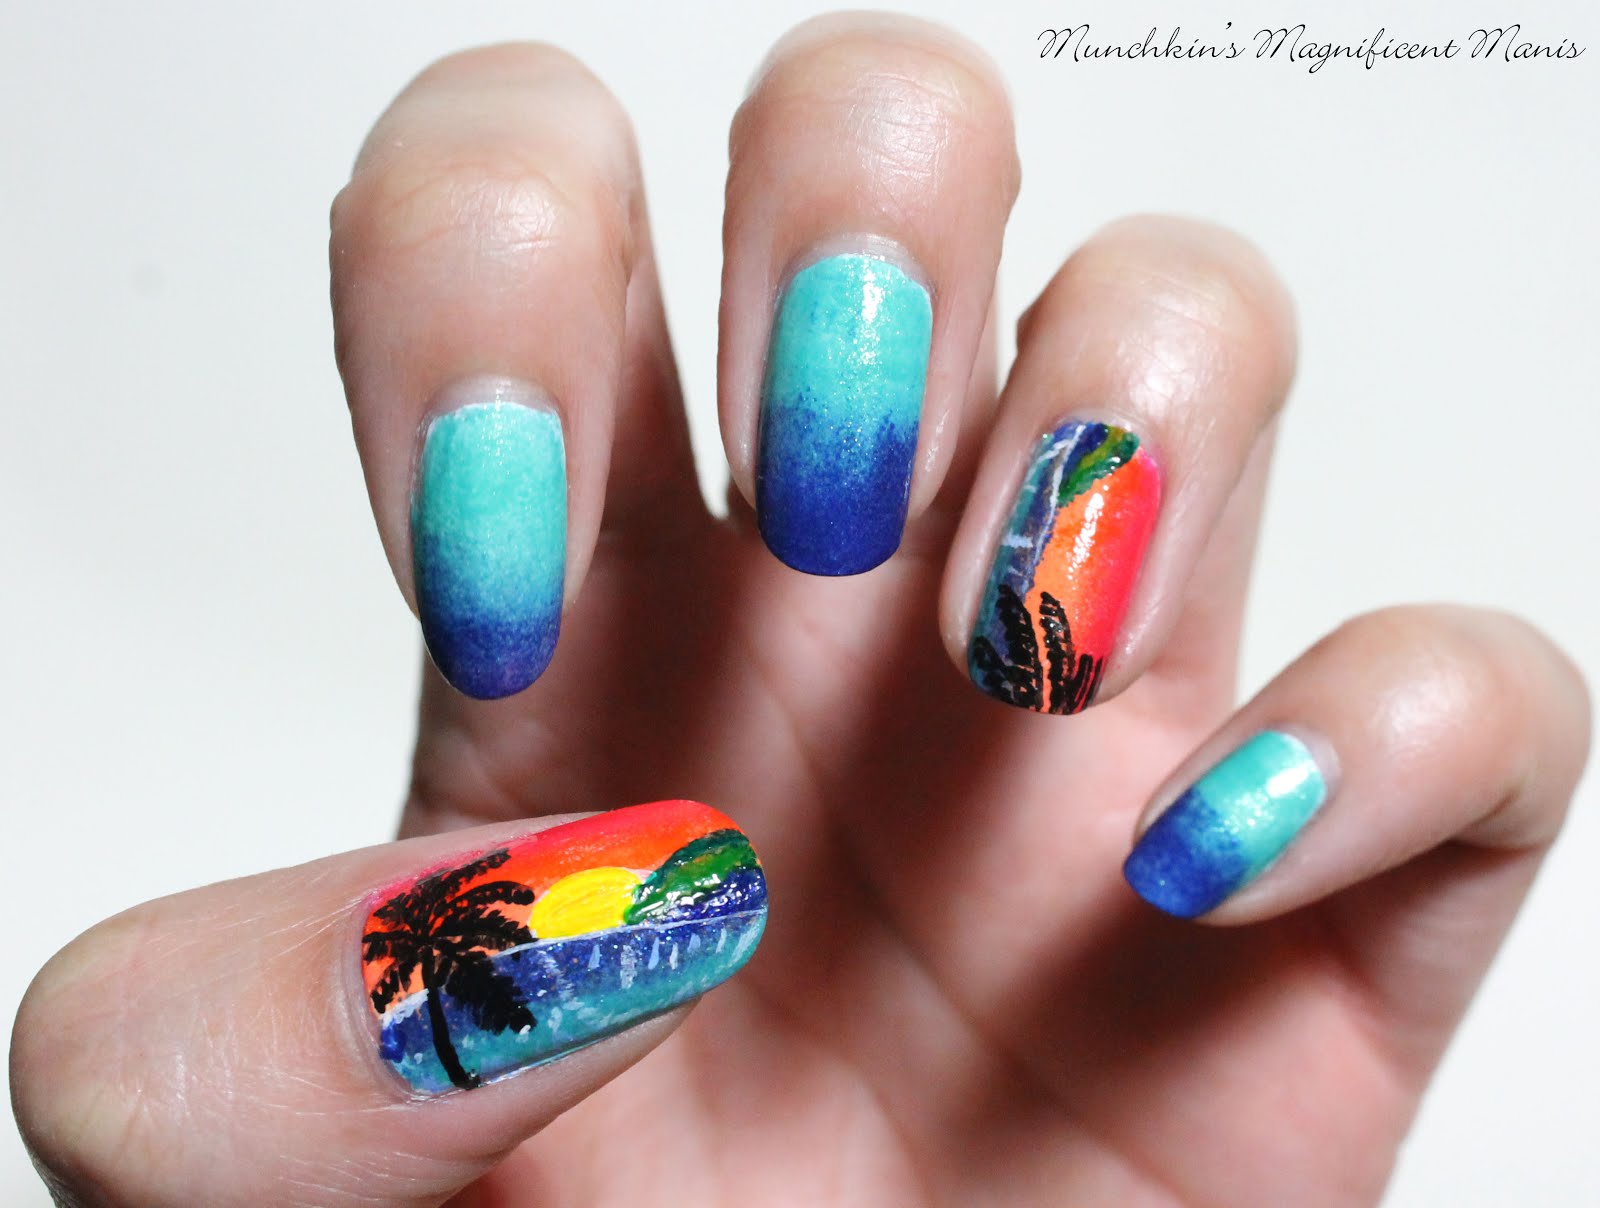 1. Bright tropical nail design with rhinestones - wide 7